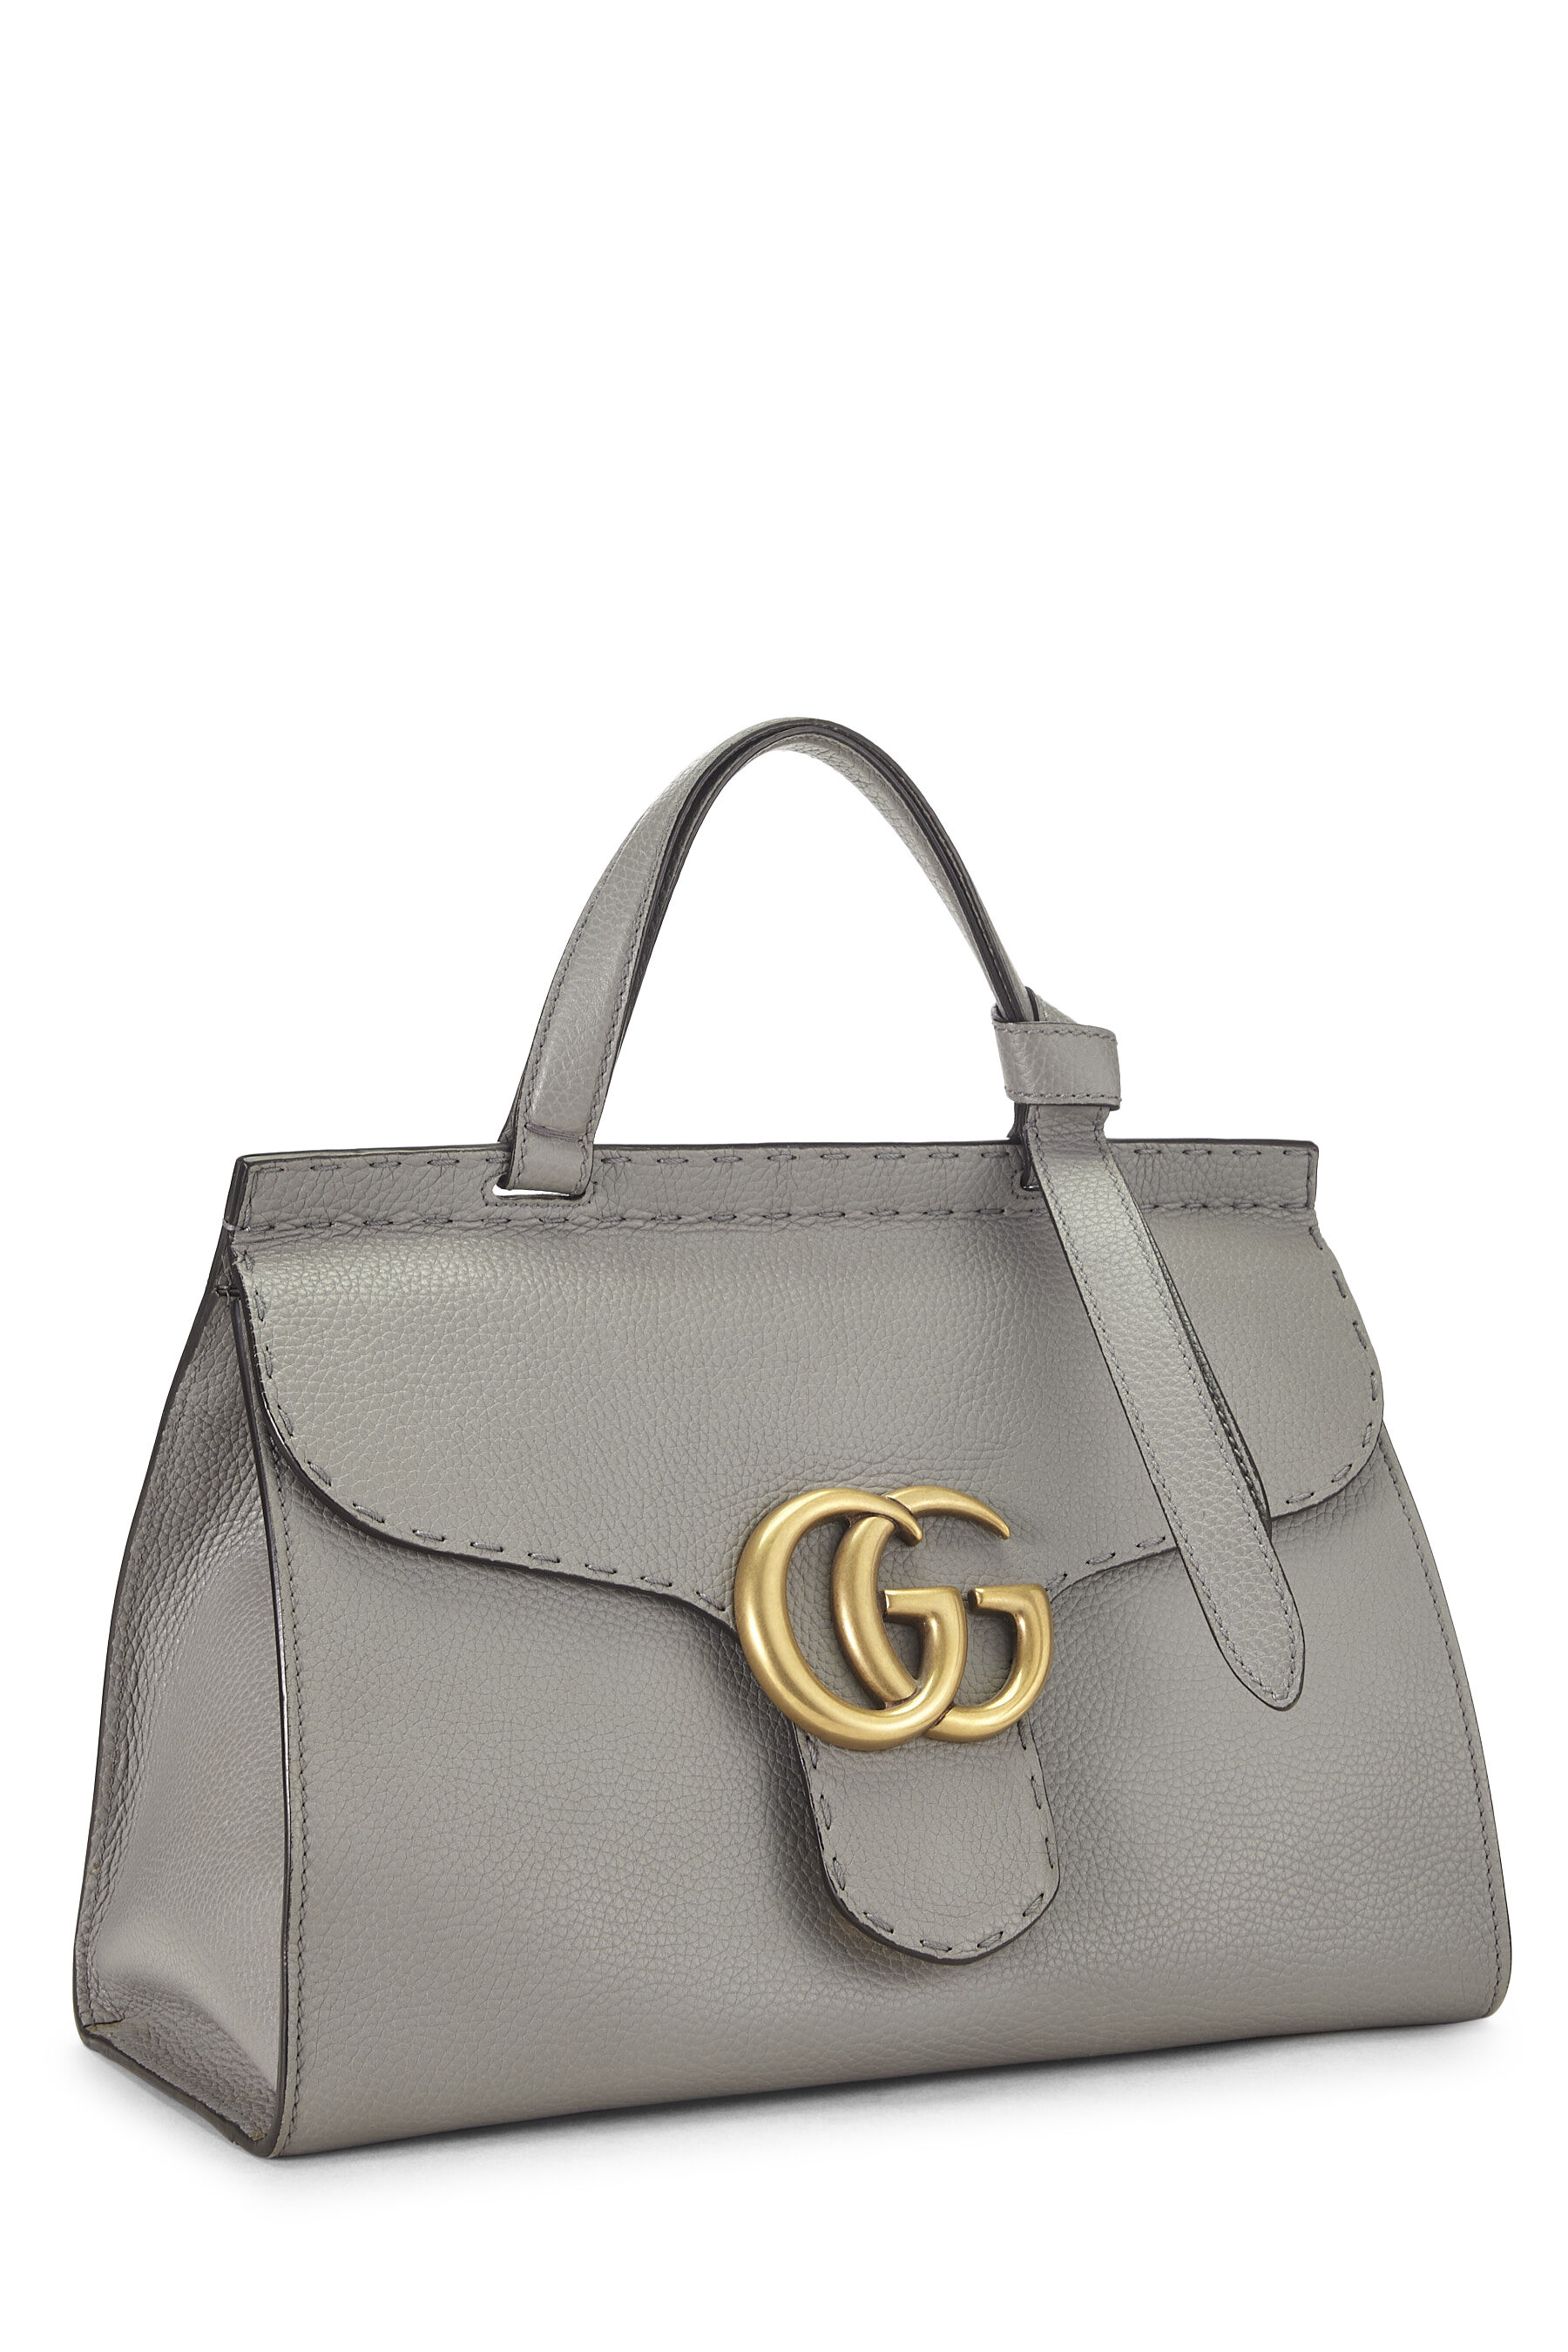 Grey Leather GG Marmont Top Handle Flap Bag